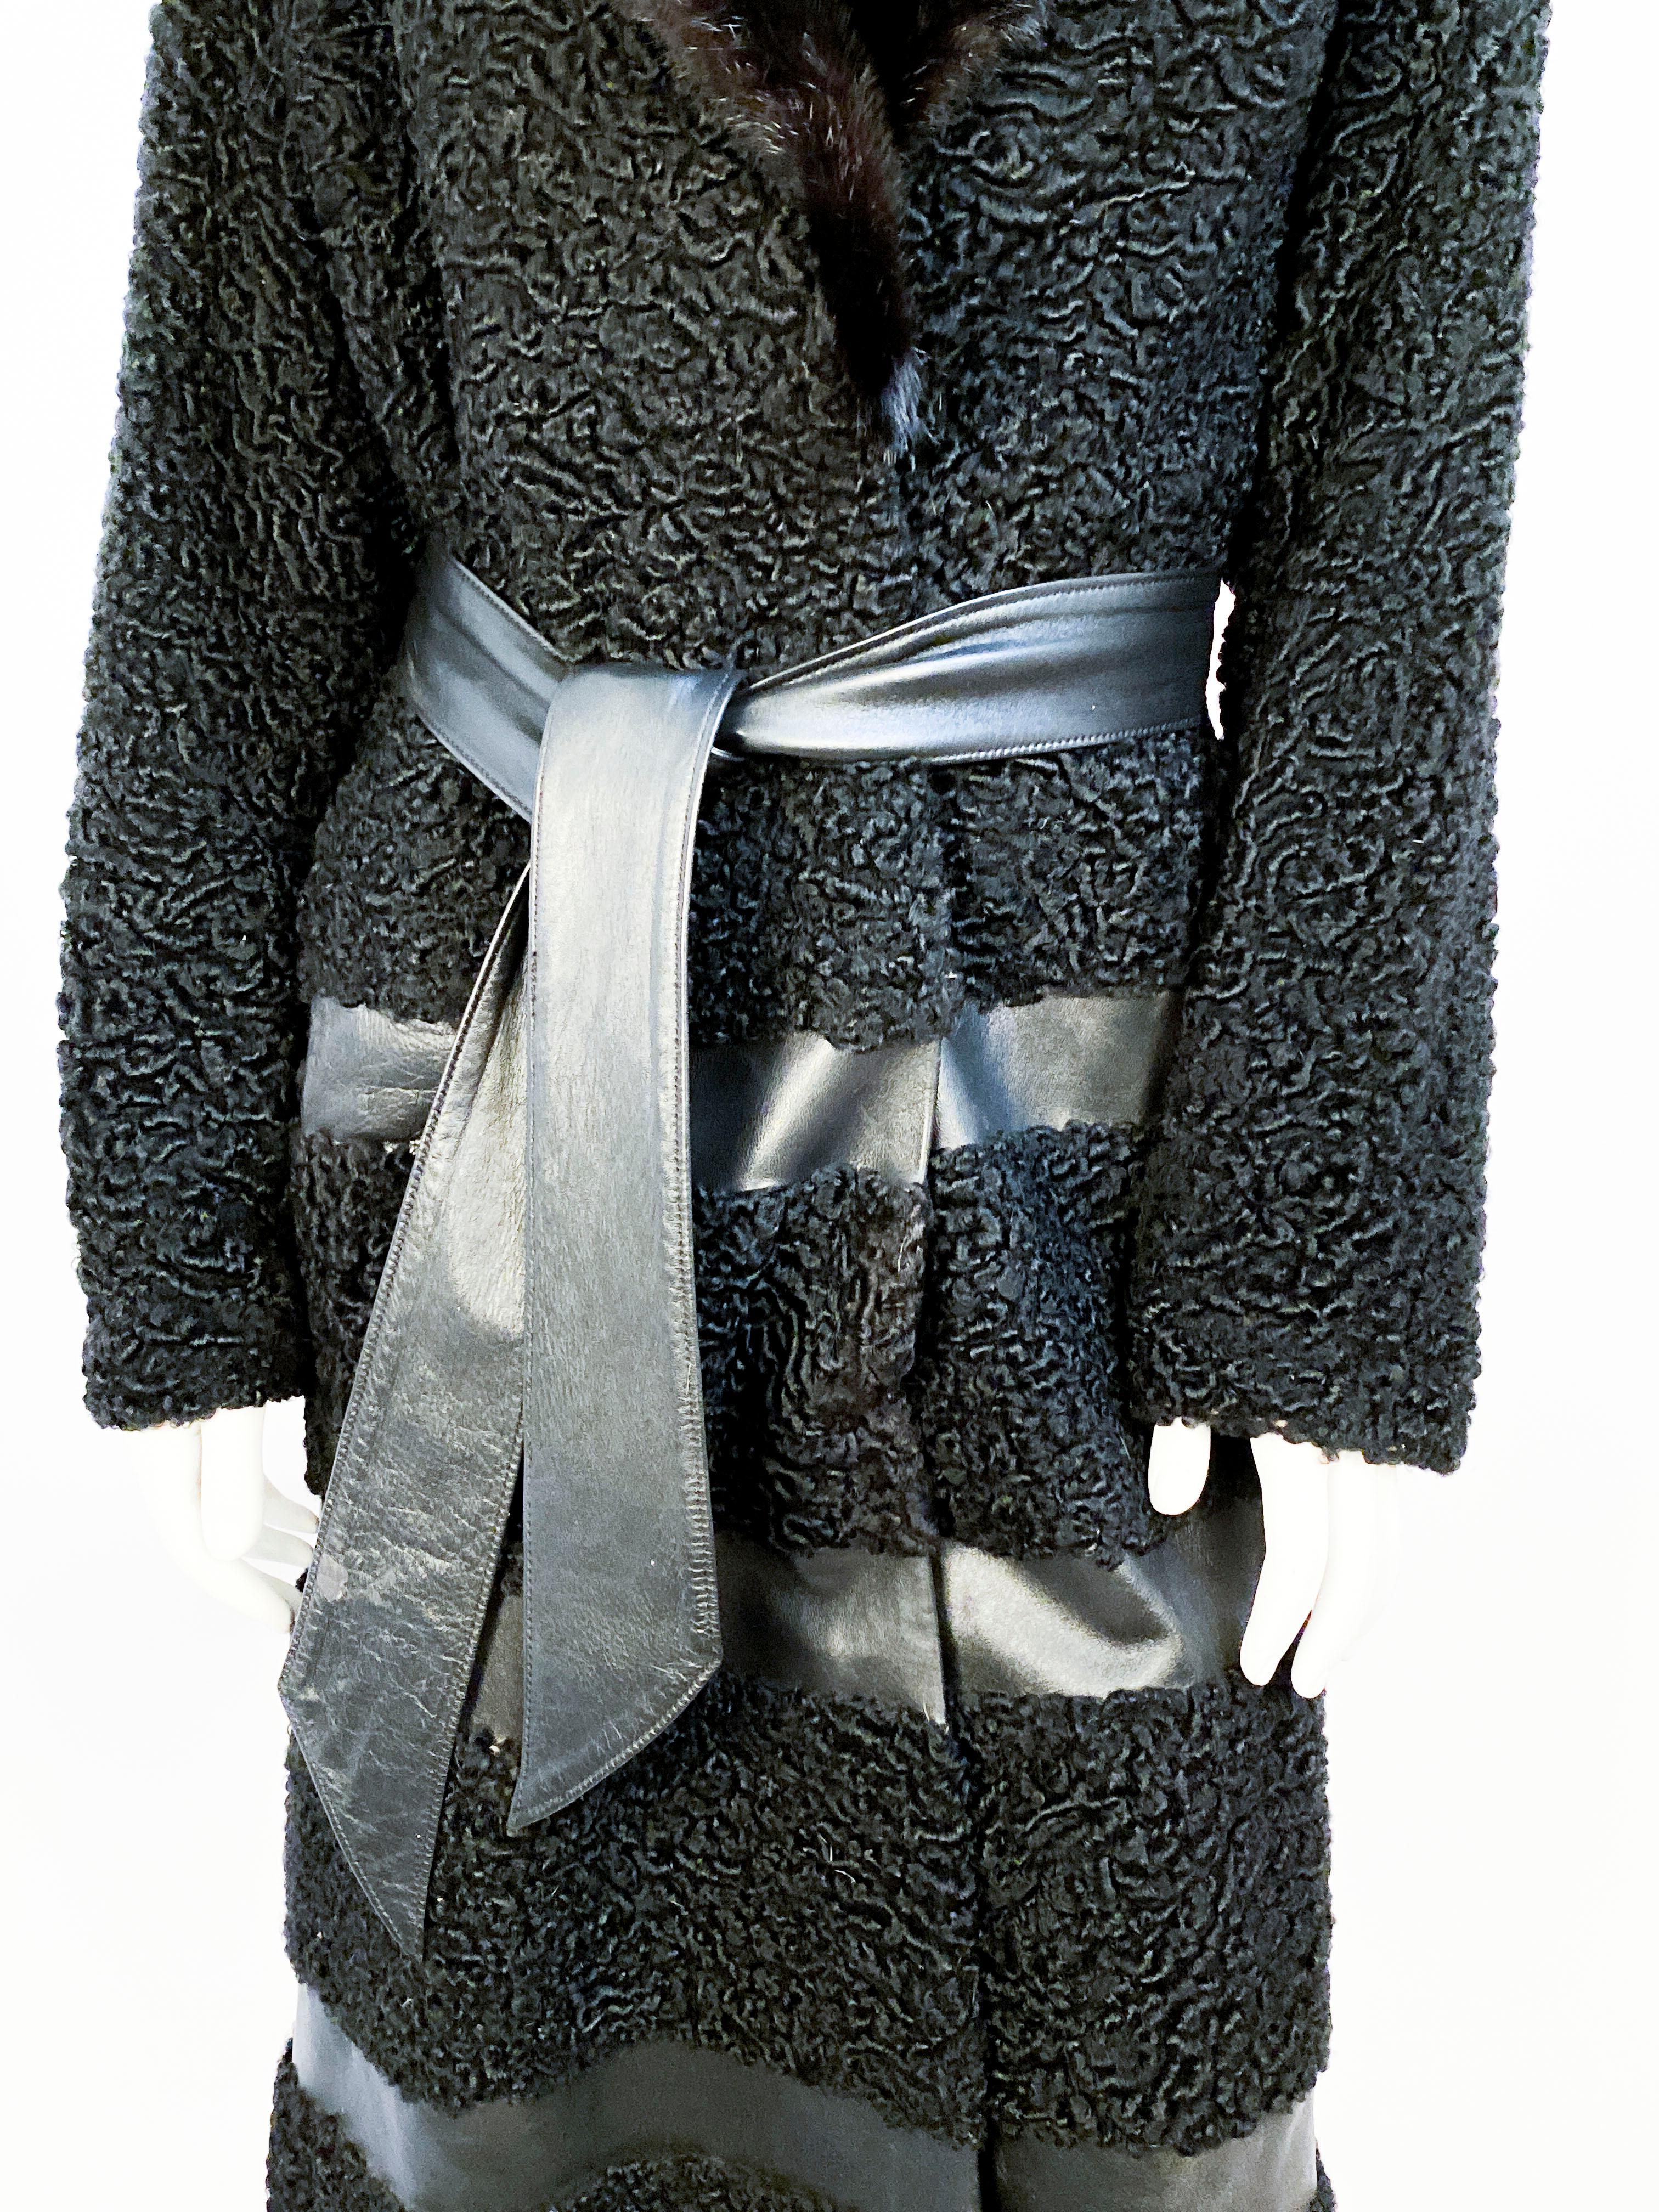 Late 1960s/Early 1970s Black Persian lab coat with bands of black leather and enlarged black mink collar. The body of the coat is lined with a checkerboard silk brocade lining